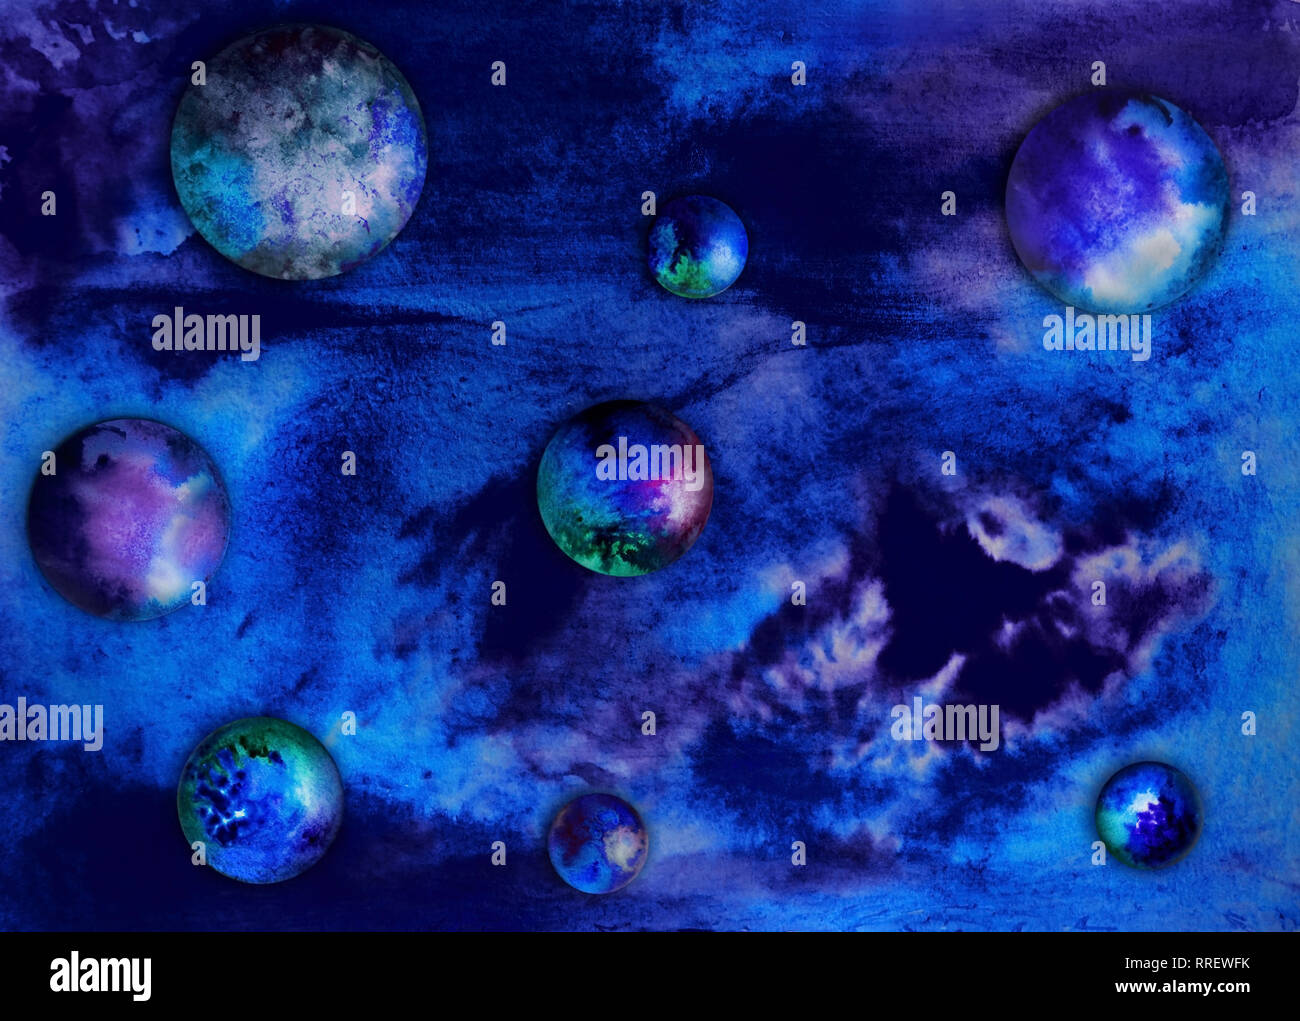 Watercolor fantastic background with voluminous colorful spheres on outer space background. Stock Photo